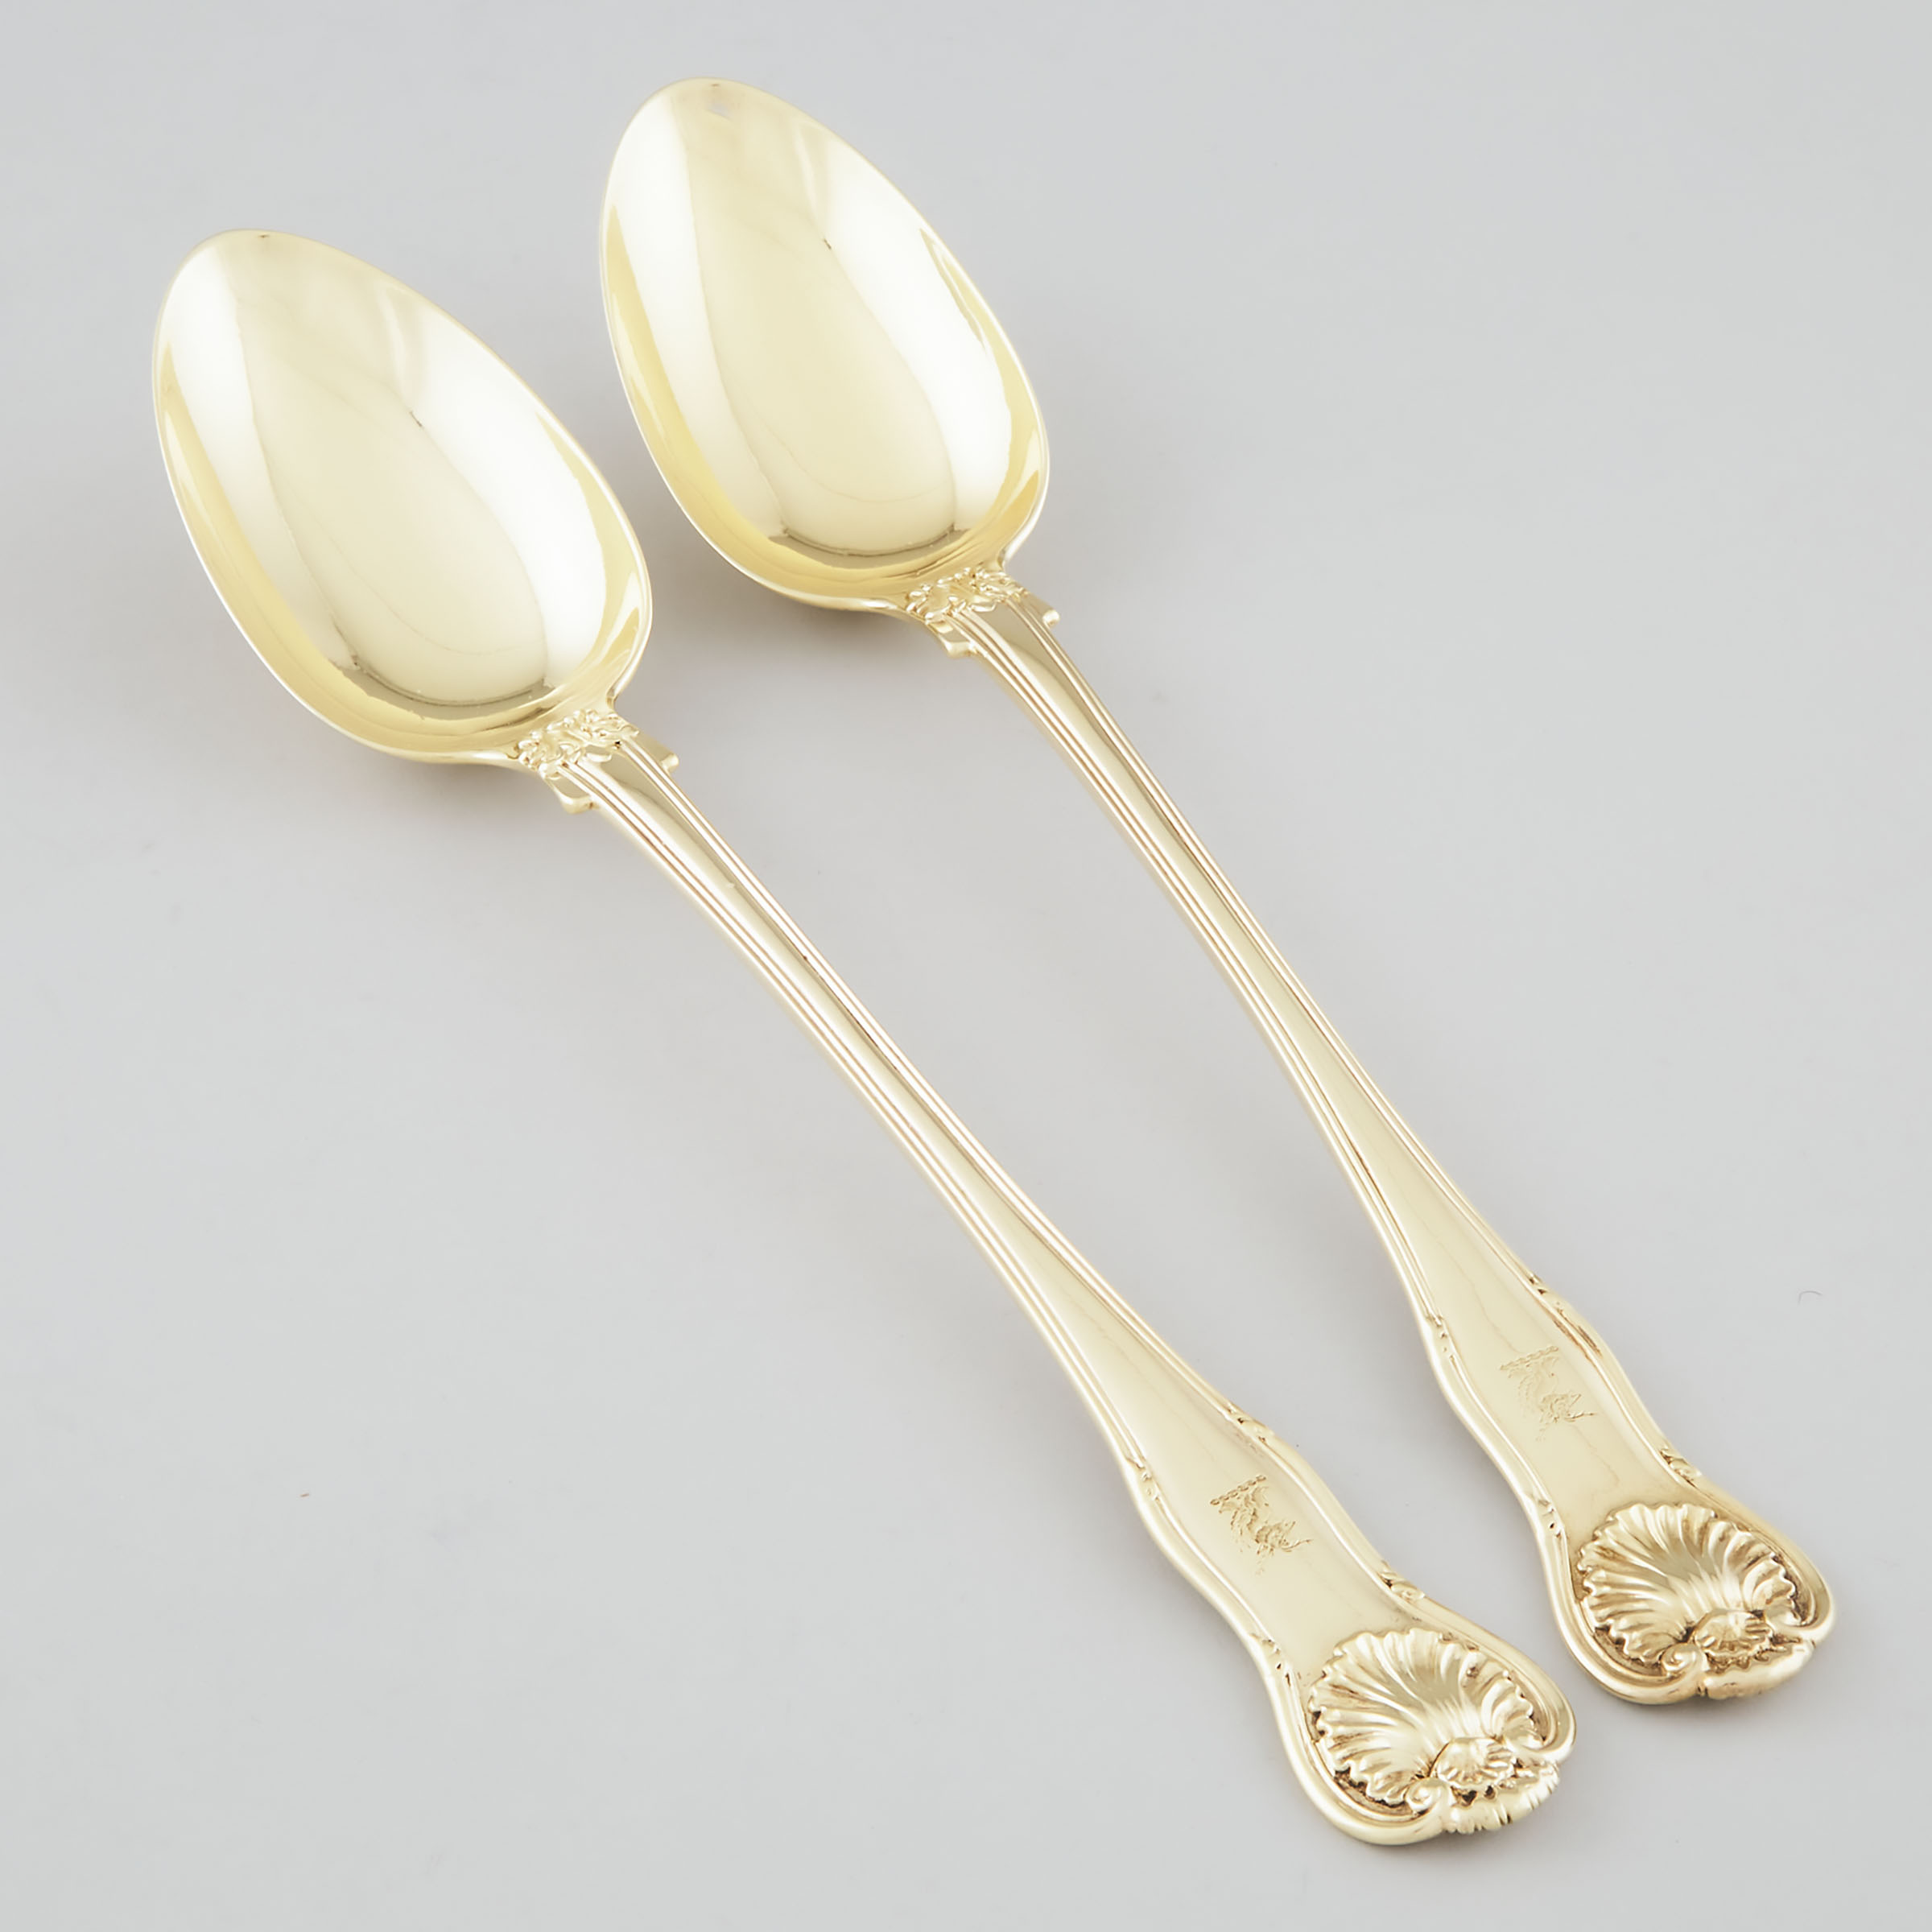 Pair of George IV Silver-Gilt King's Husk Pattern Serving Spoons, William Eley & William Fearn, London, 1822